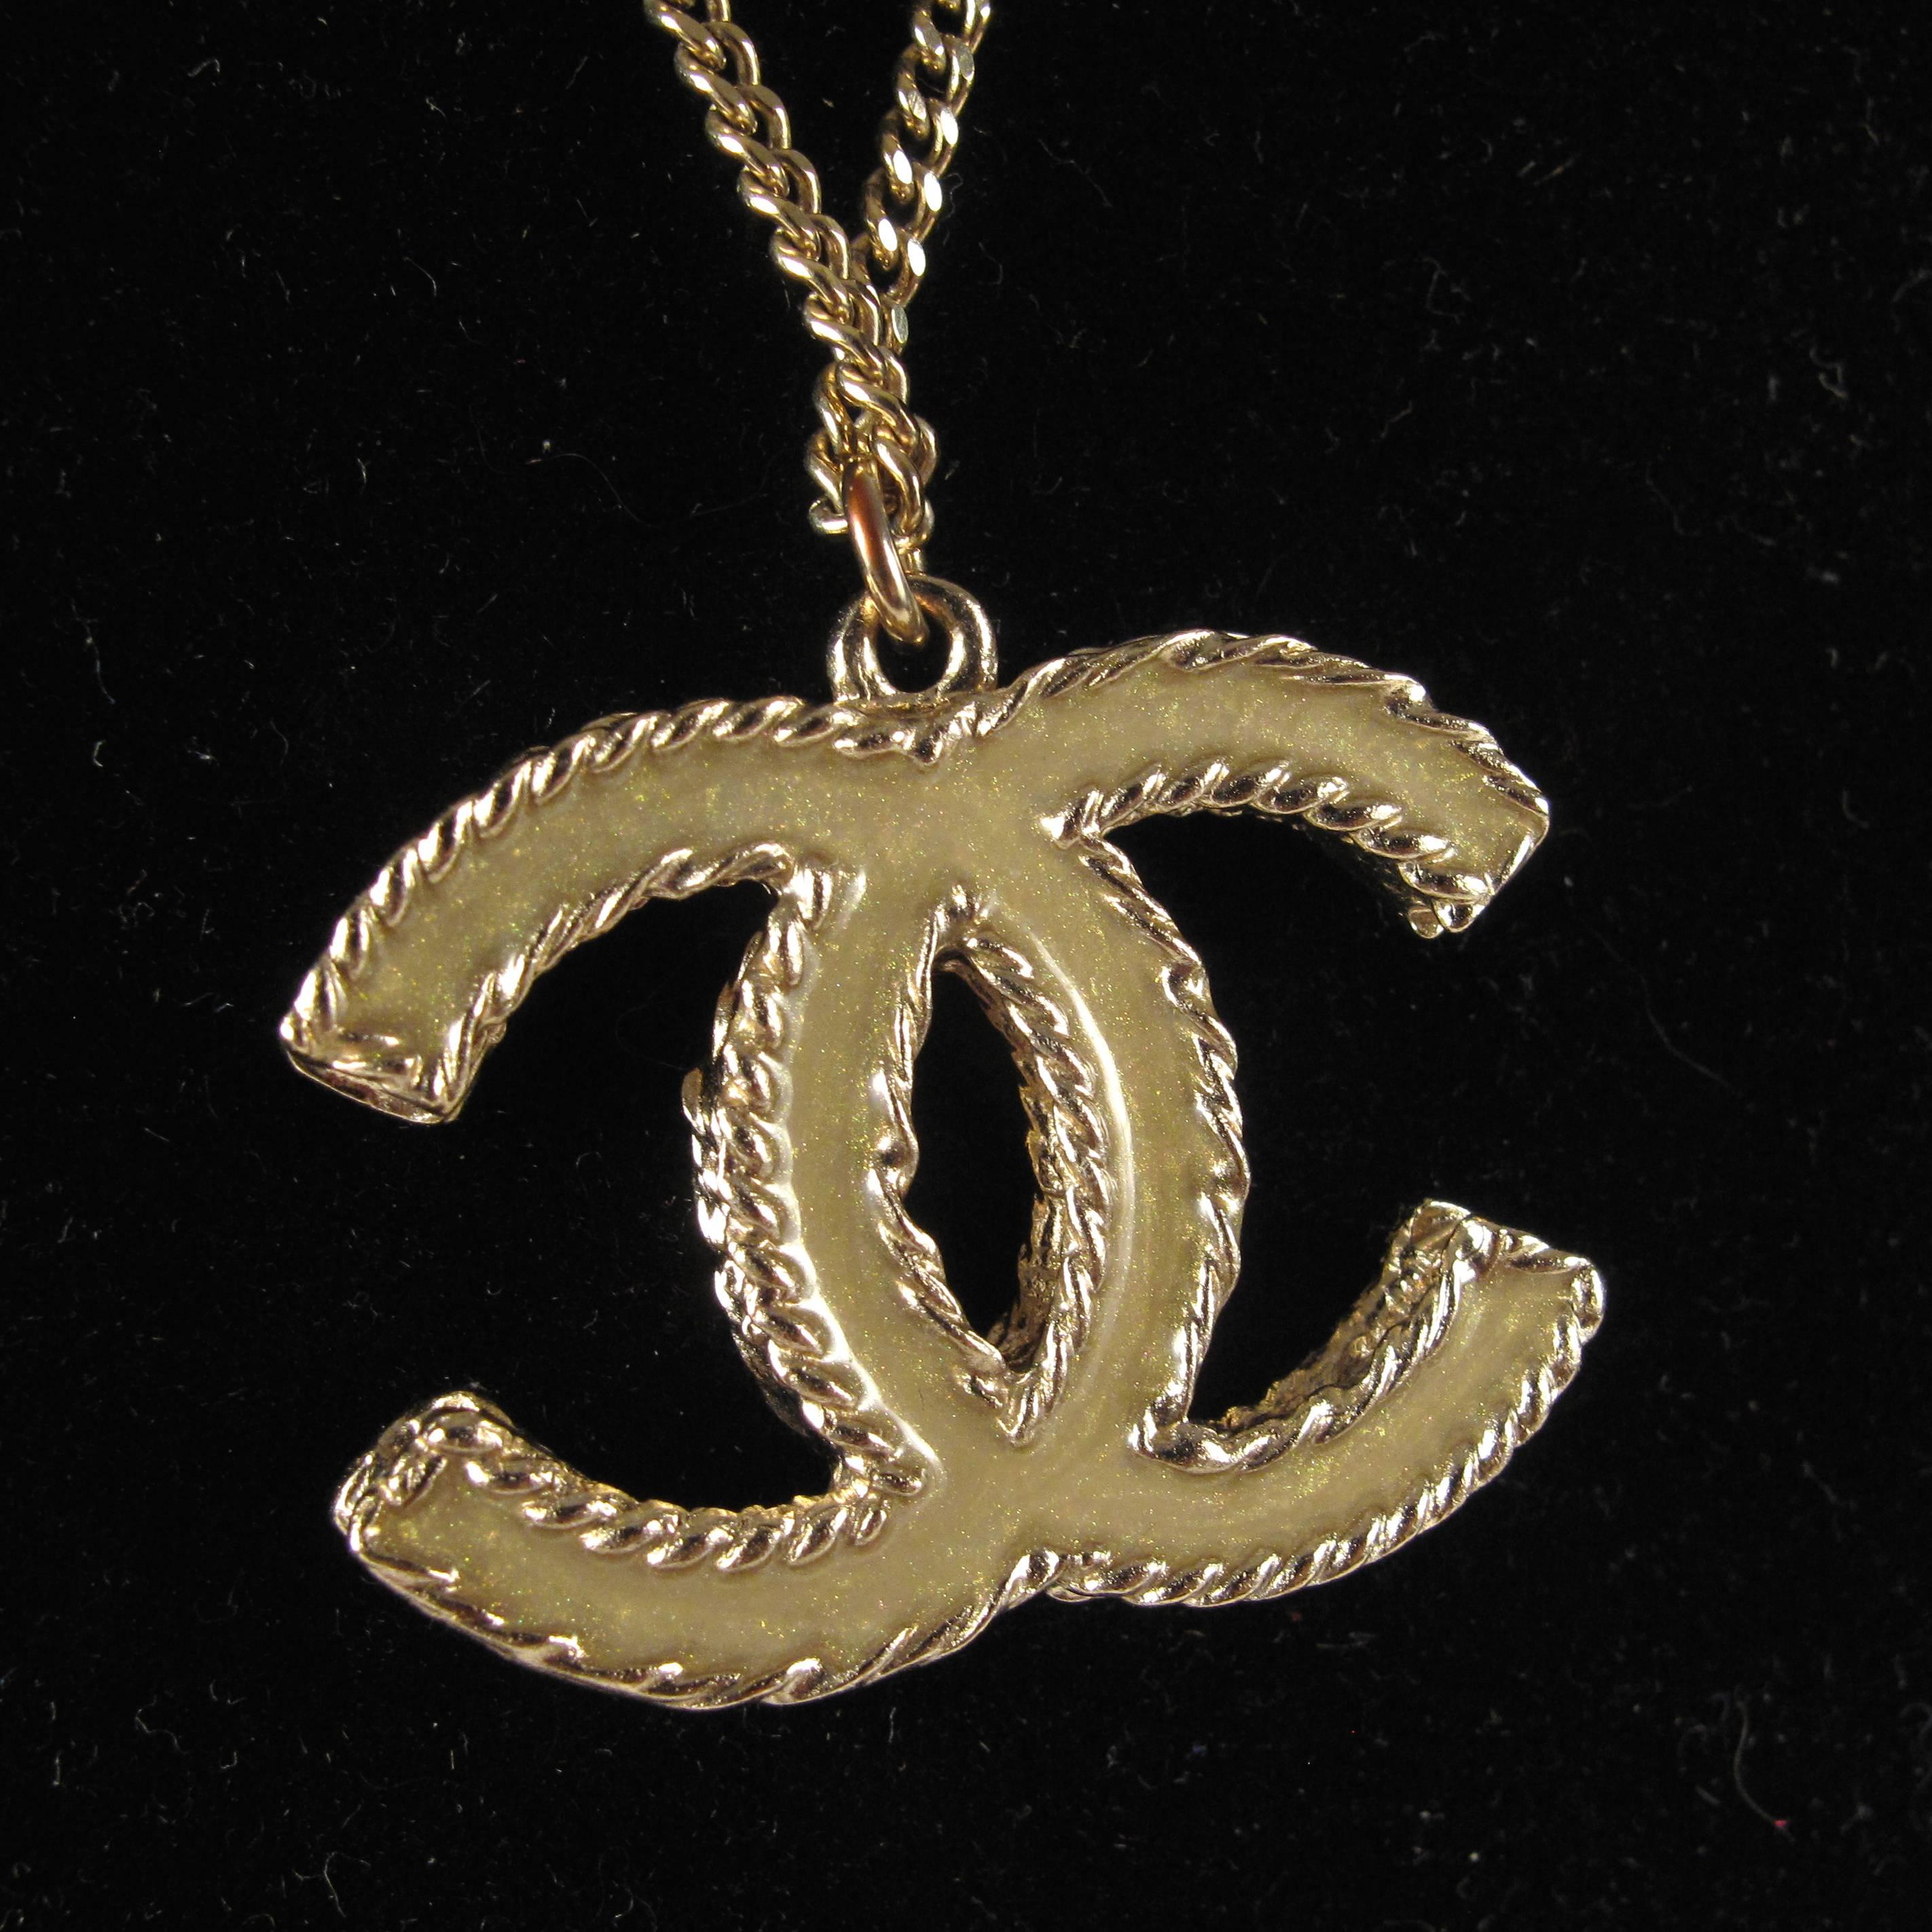 Chanel - CC Logo Crystal Necklace

Color: Gold

Material: Crystal / Metal

------------------------------------------------------------

Details:

- CC logo pendant

- crystal embellishments at logo

- stamped A13 C - from 2013 cruise